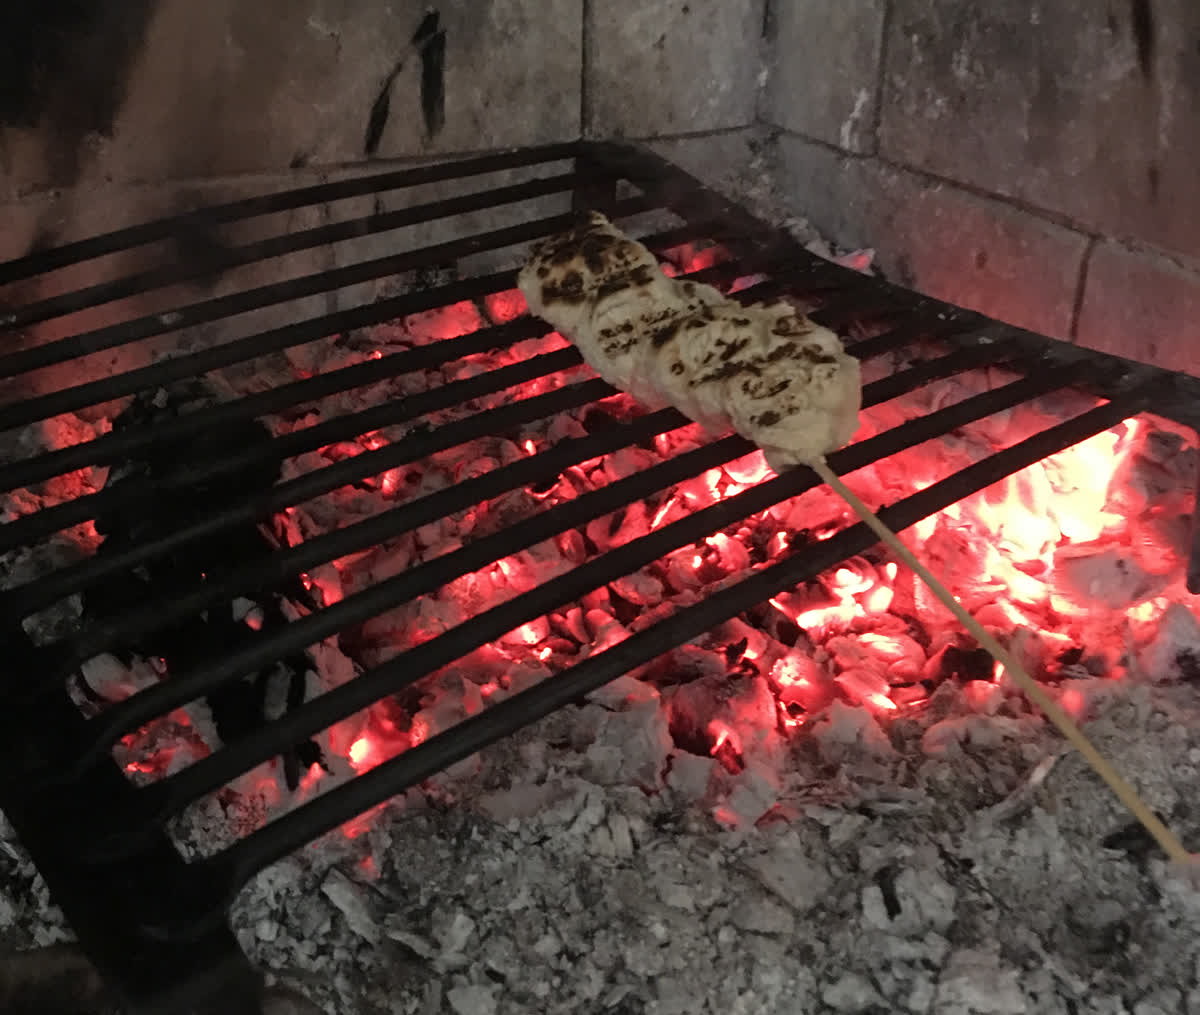 A piece of bread being cooked over an open fire.